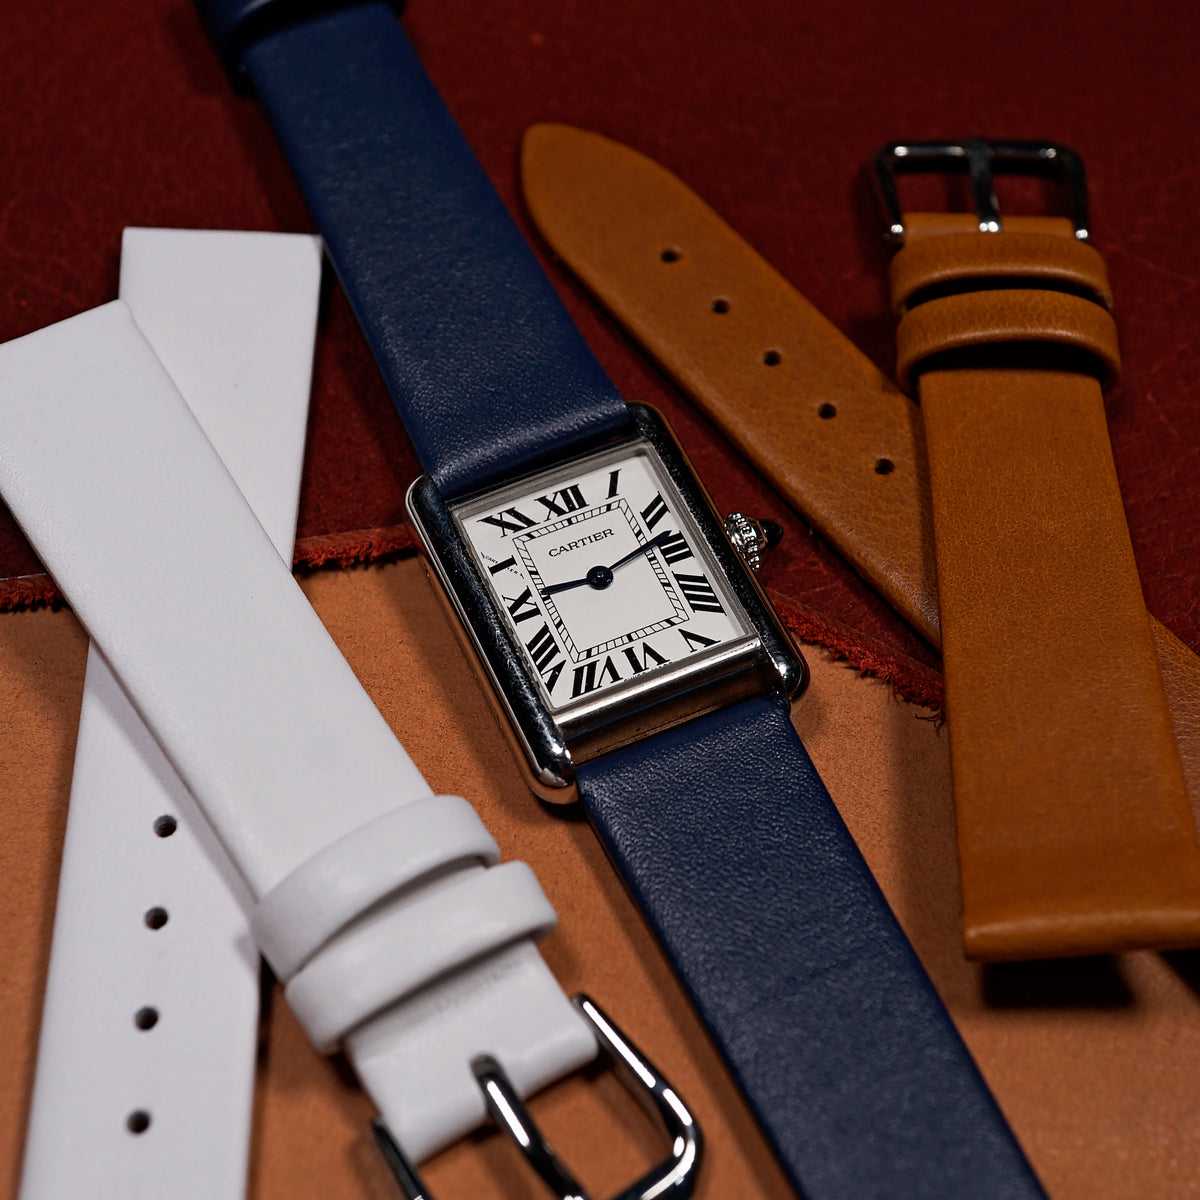 Unstitched Smooth Leather Watch Strap in Navy - Nomad Watch Works SG